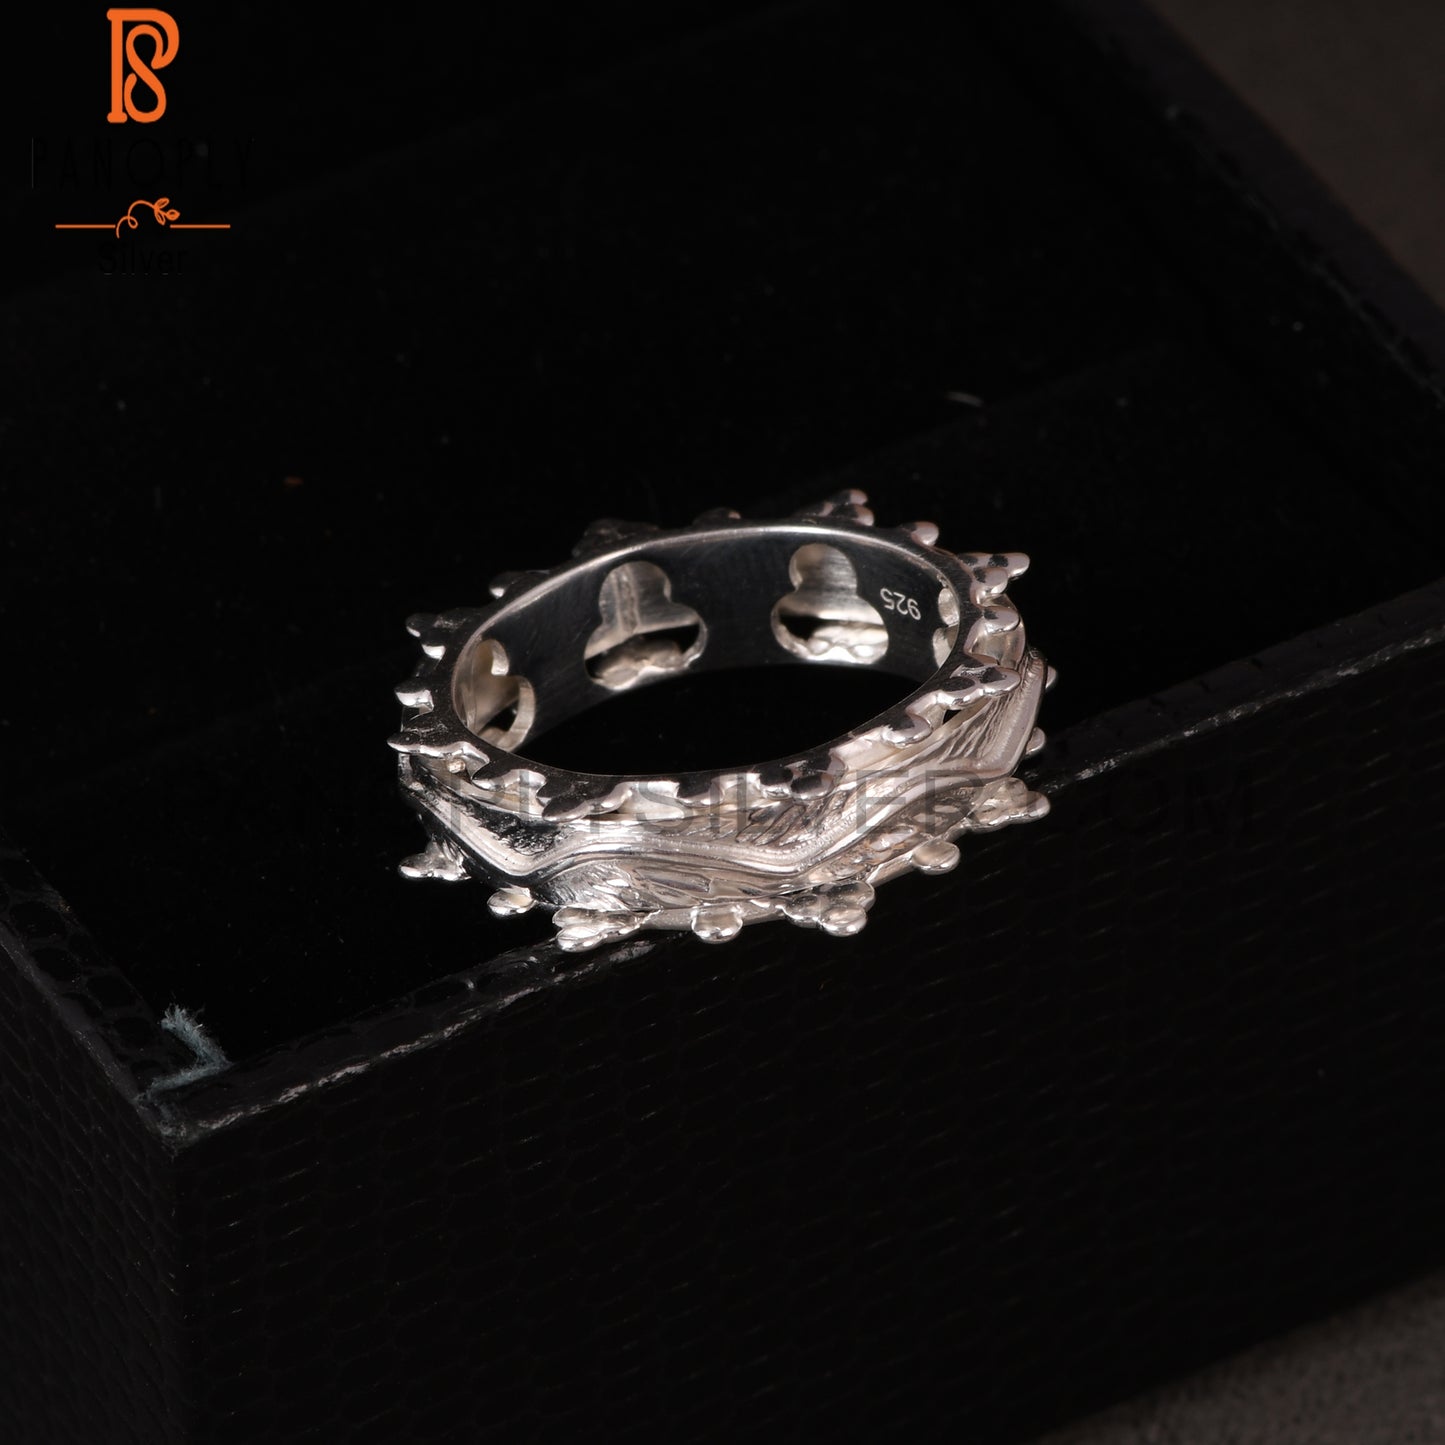 Engraved Ridges 925 Sterling Silver Ring